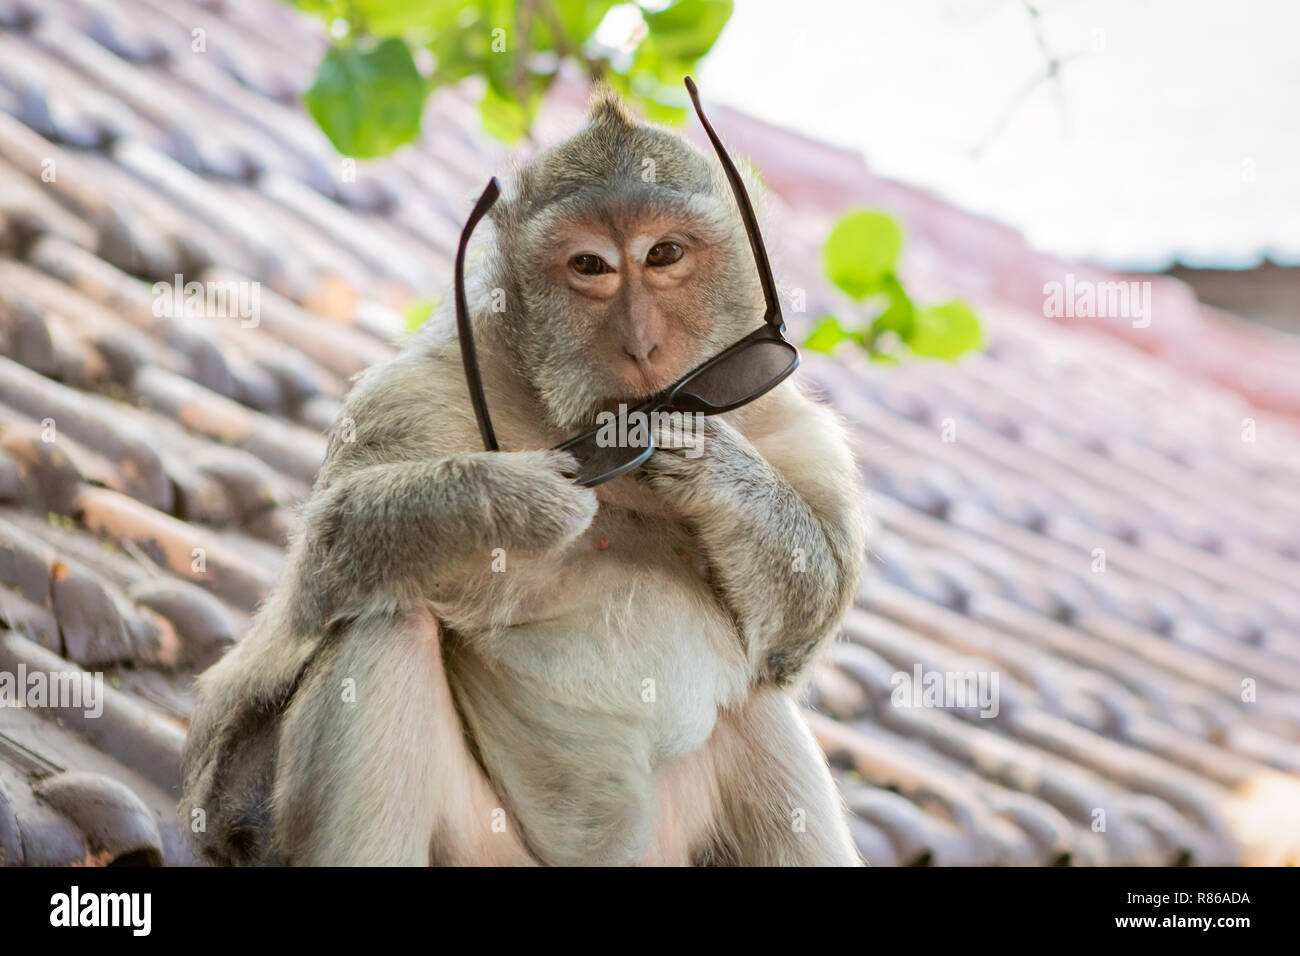 Monkey Trying to Put On a Pair of Sunglasses in Bali, Indonesia Stock Photo  - Alamy